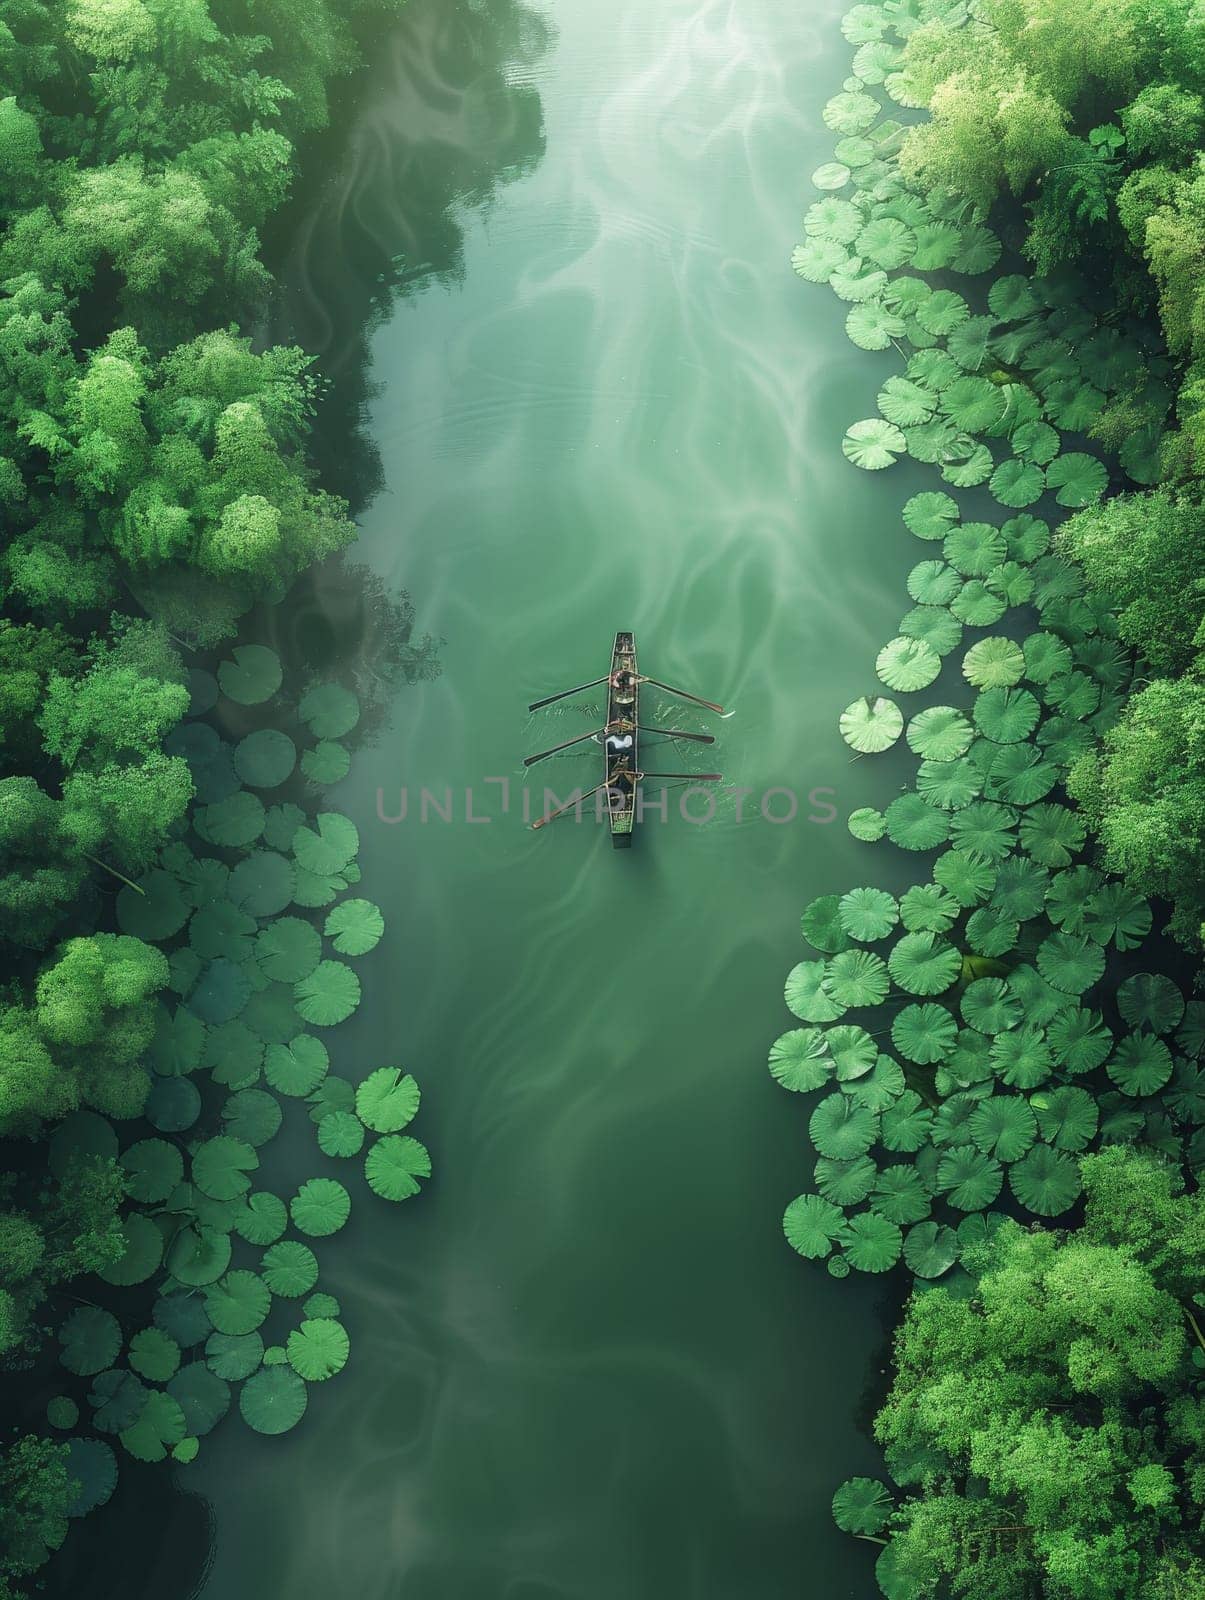 A boat is floating on a river with green lily pads on the shore. The boat is surrounded by trees and the water is calm